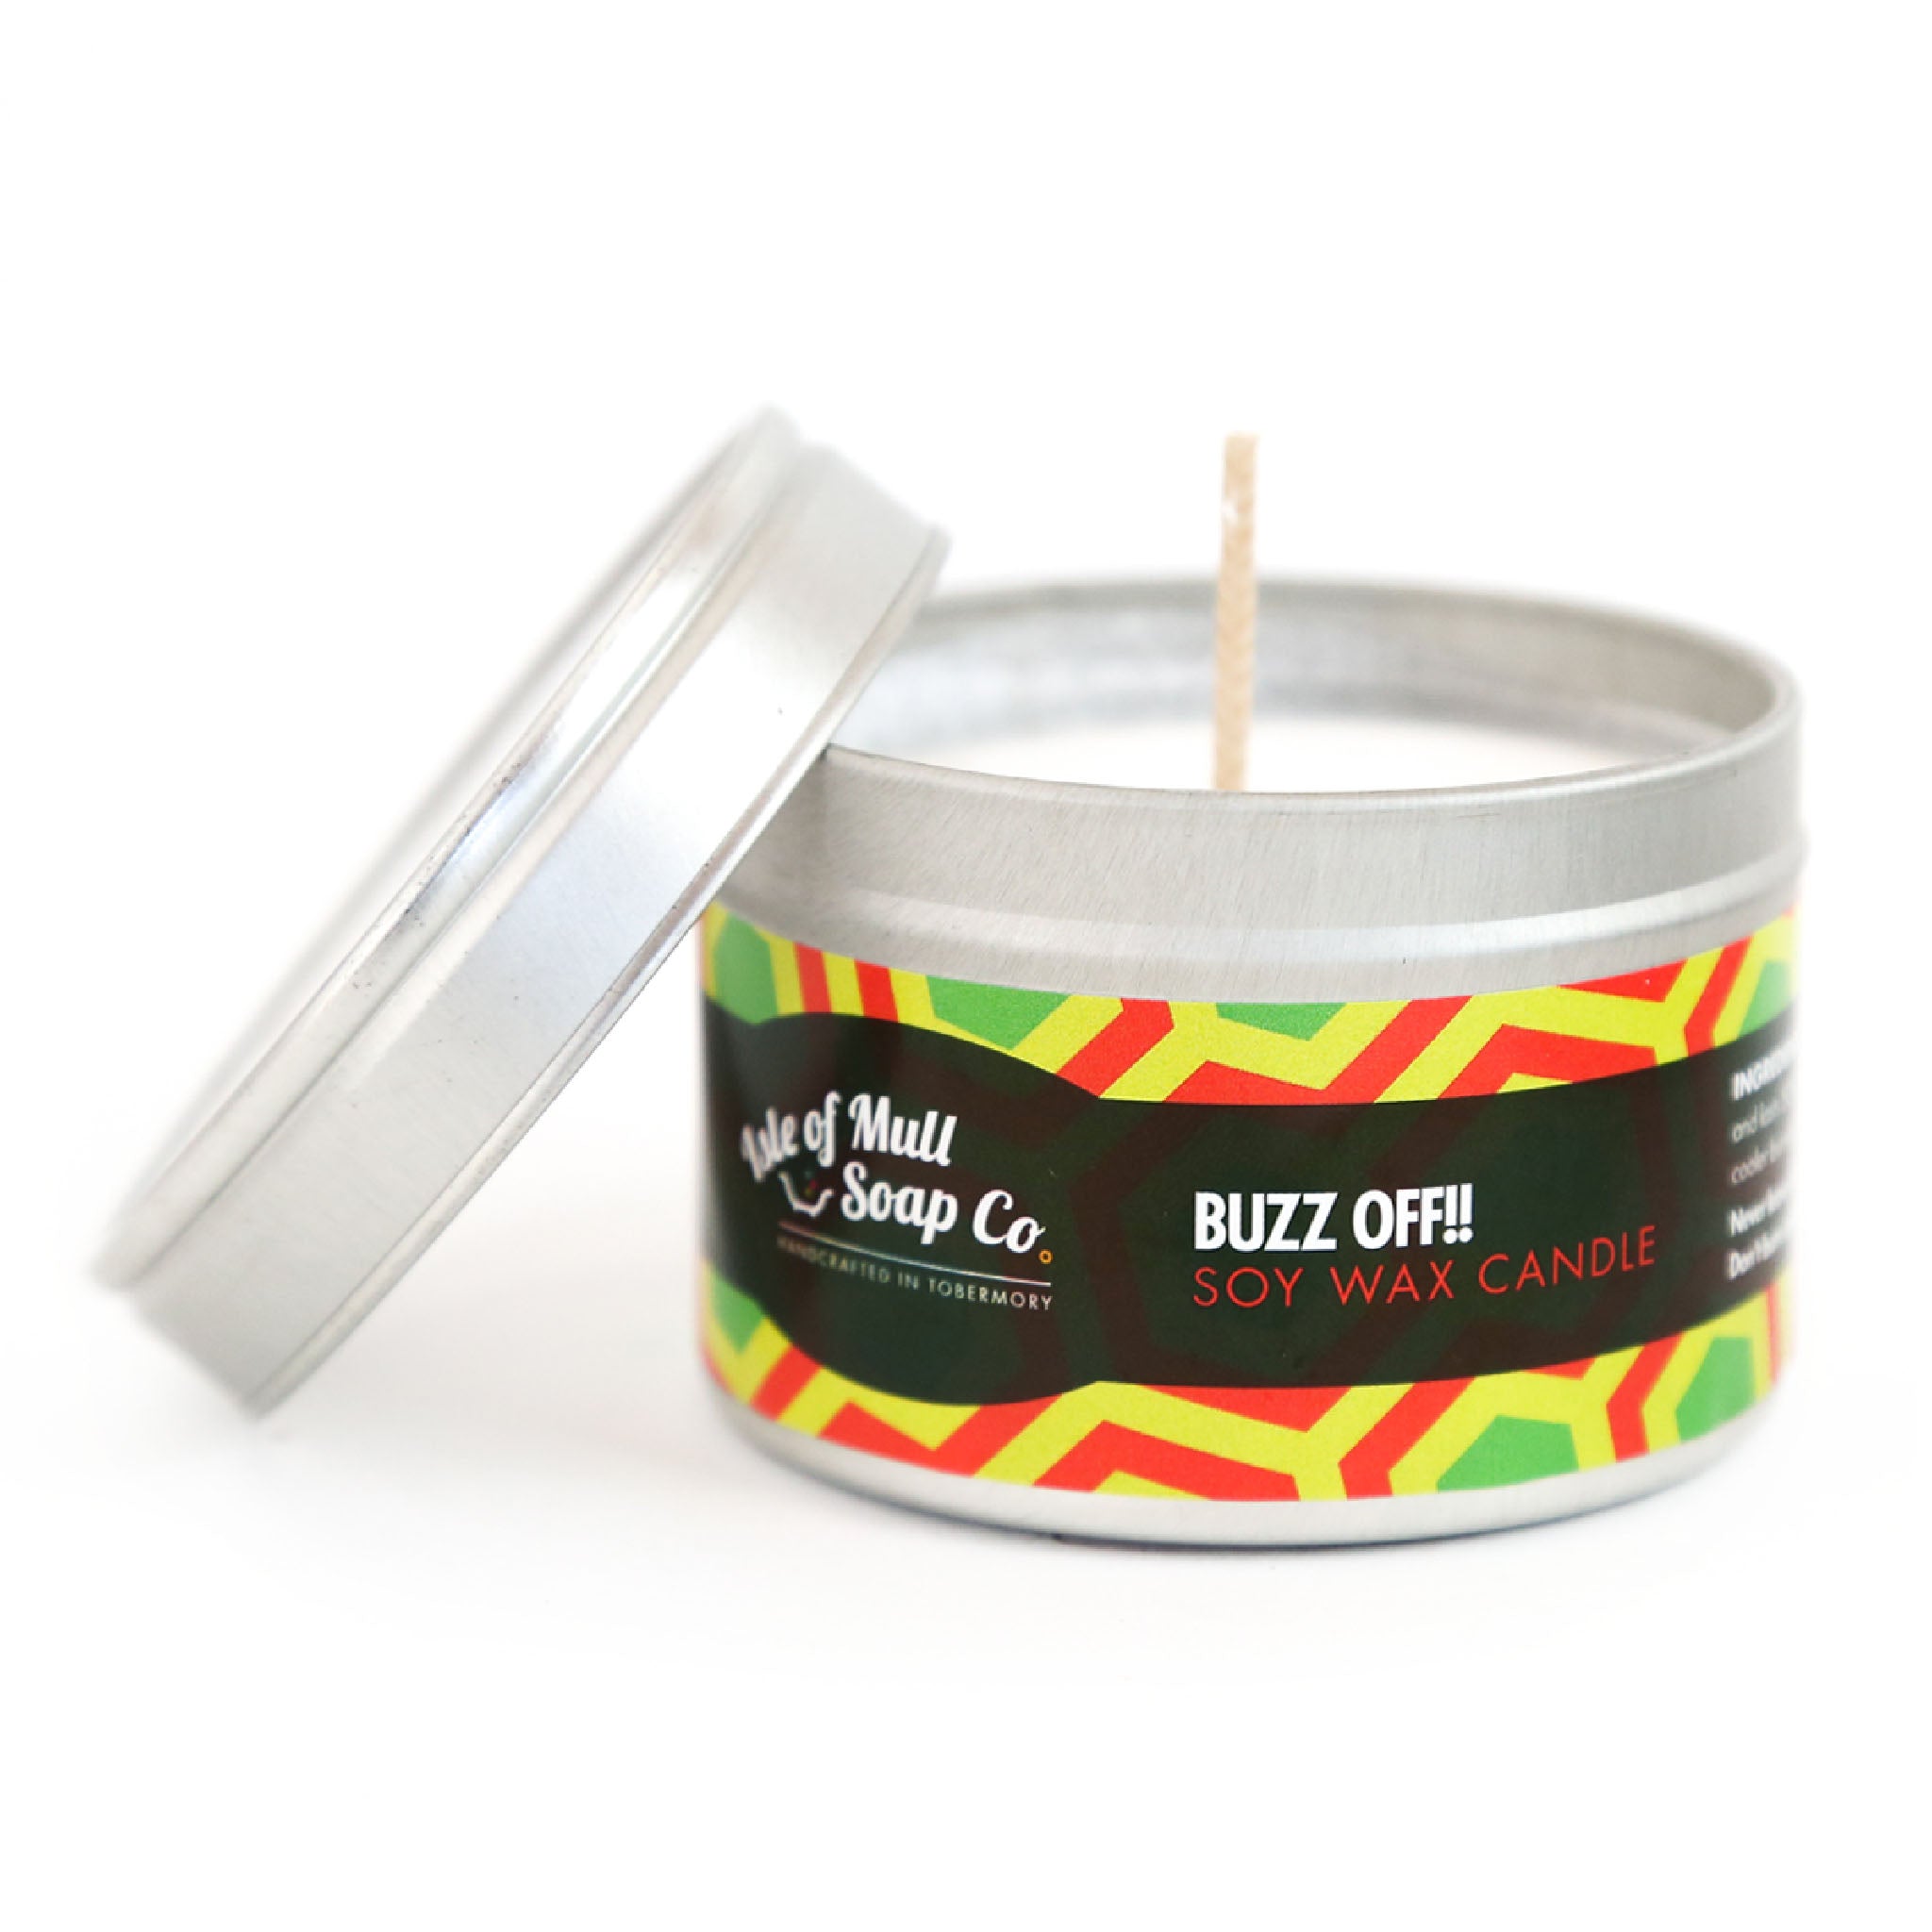 Buzz Off Isle of Mull Candle